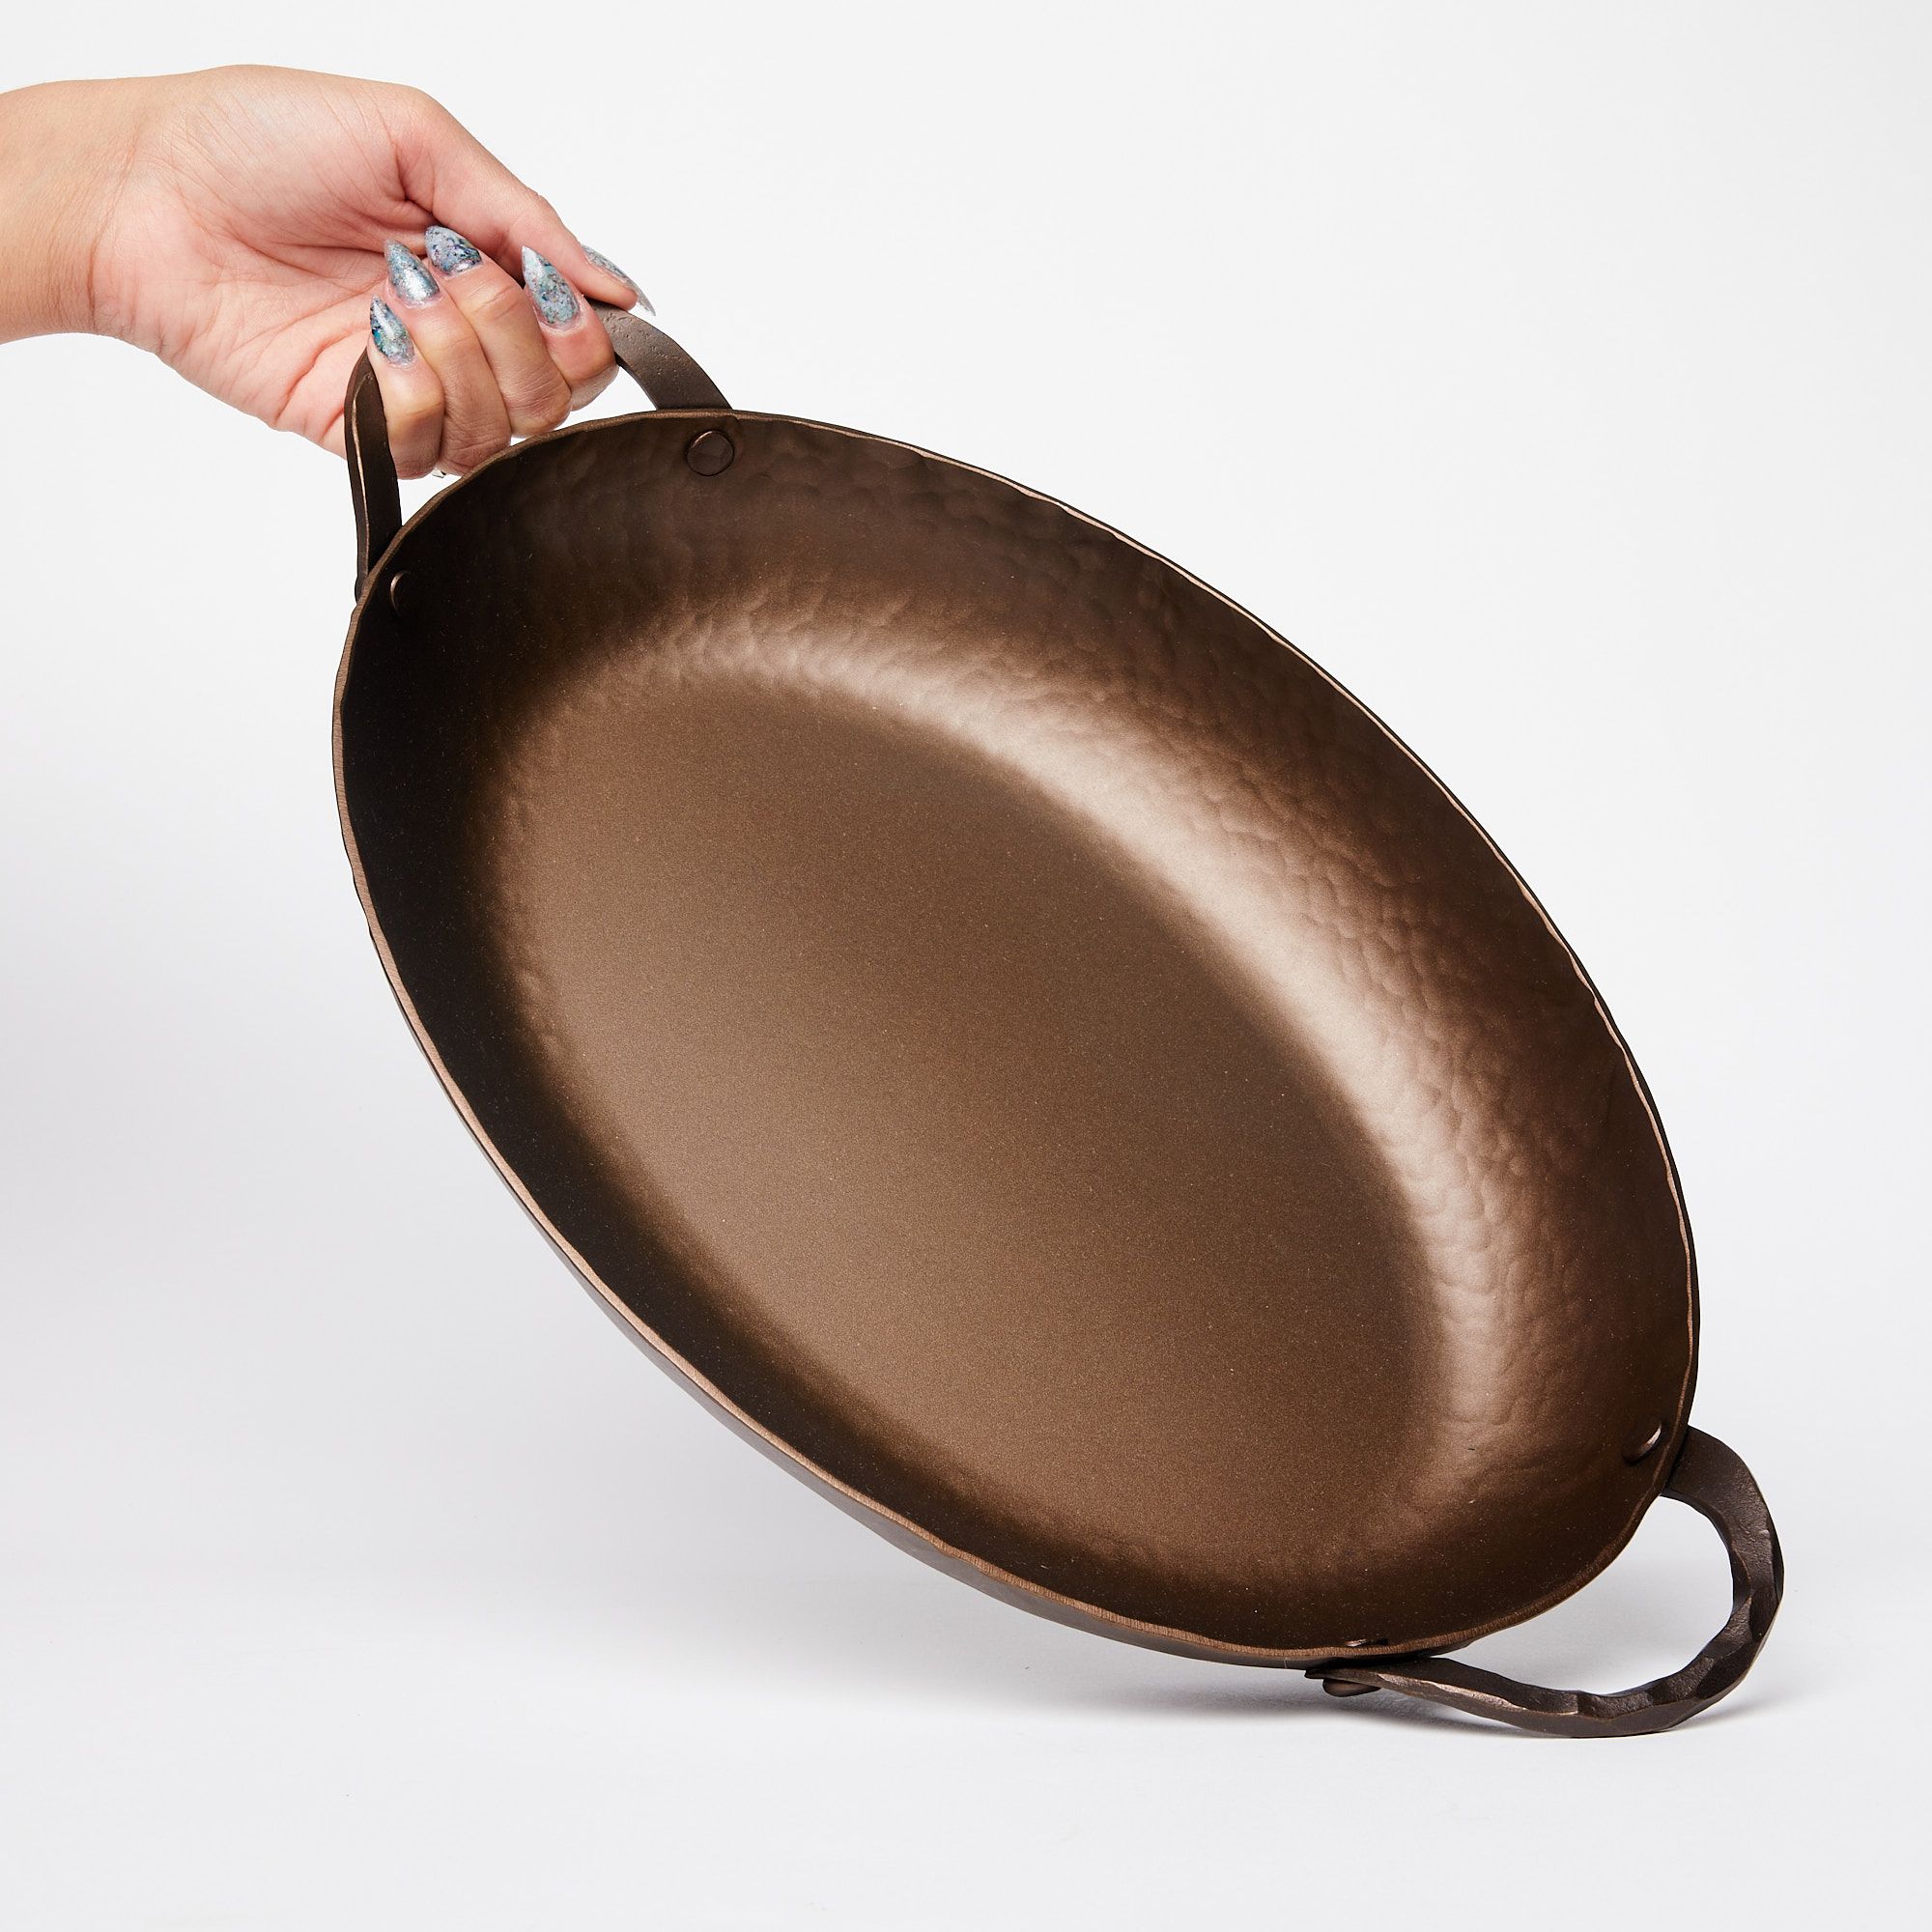 A hand tilting a hammered metal oval roasting pan with handles on both sides